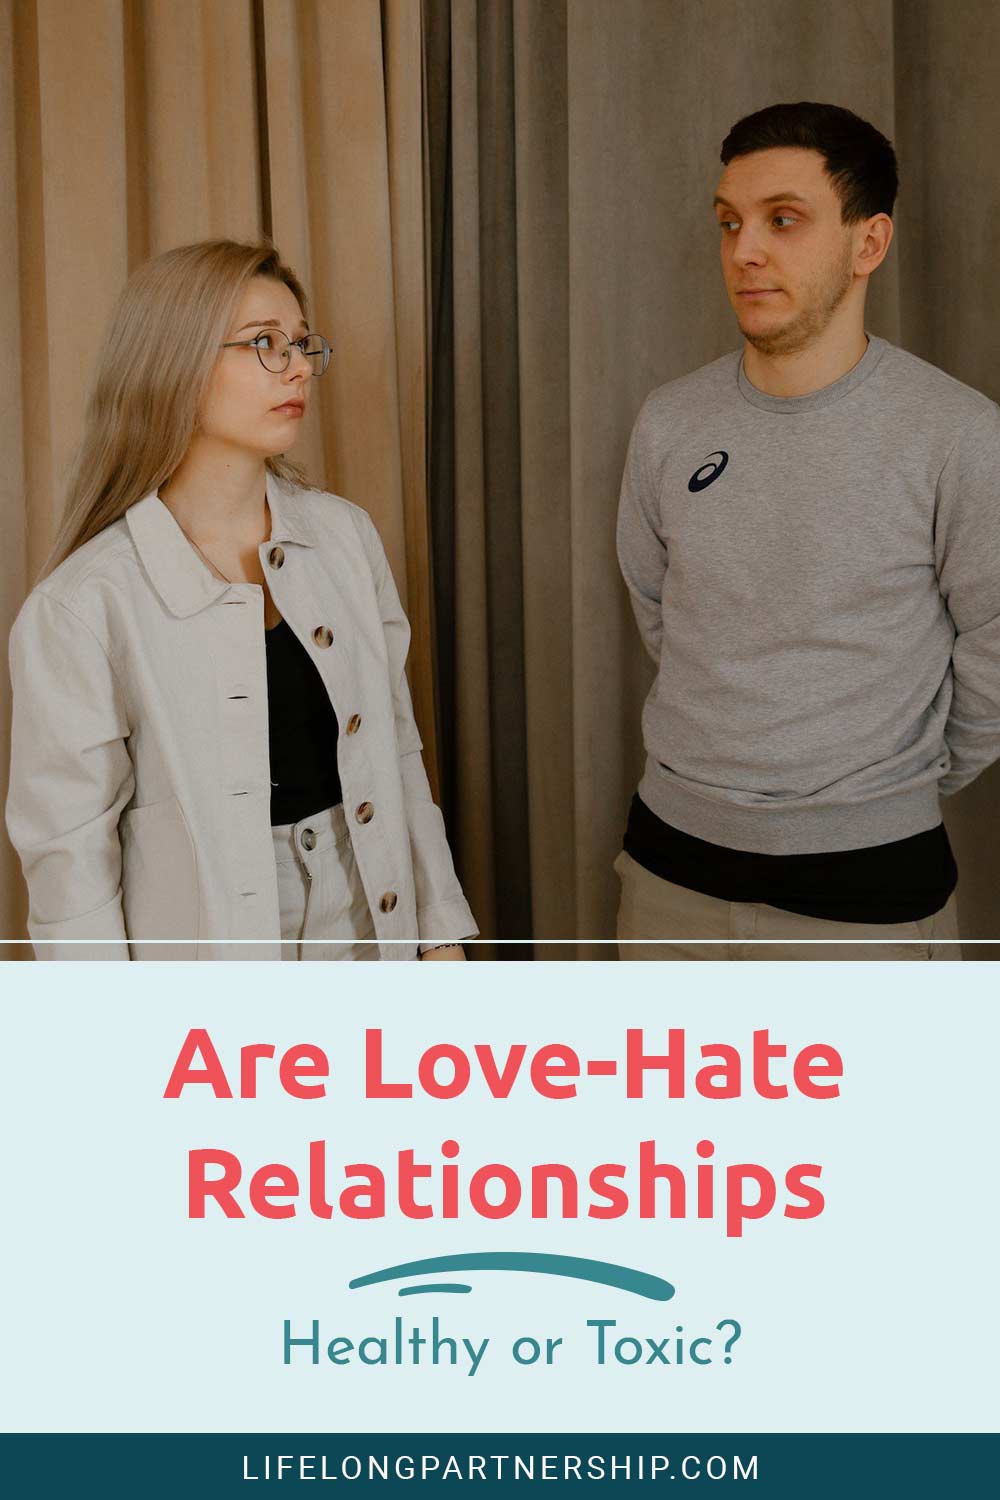 Are Love-Hate Relationships Healthy or Toxic?